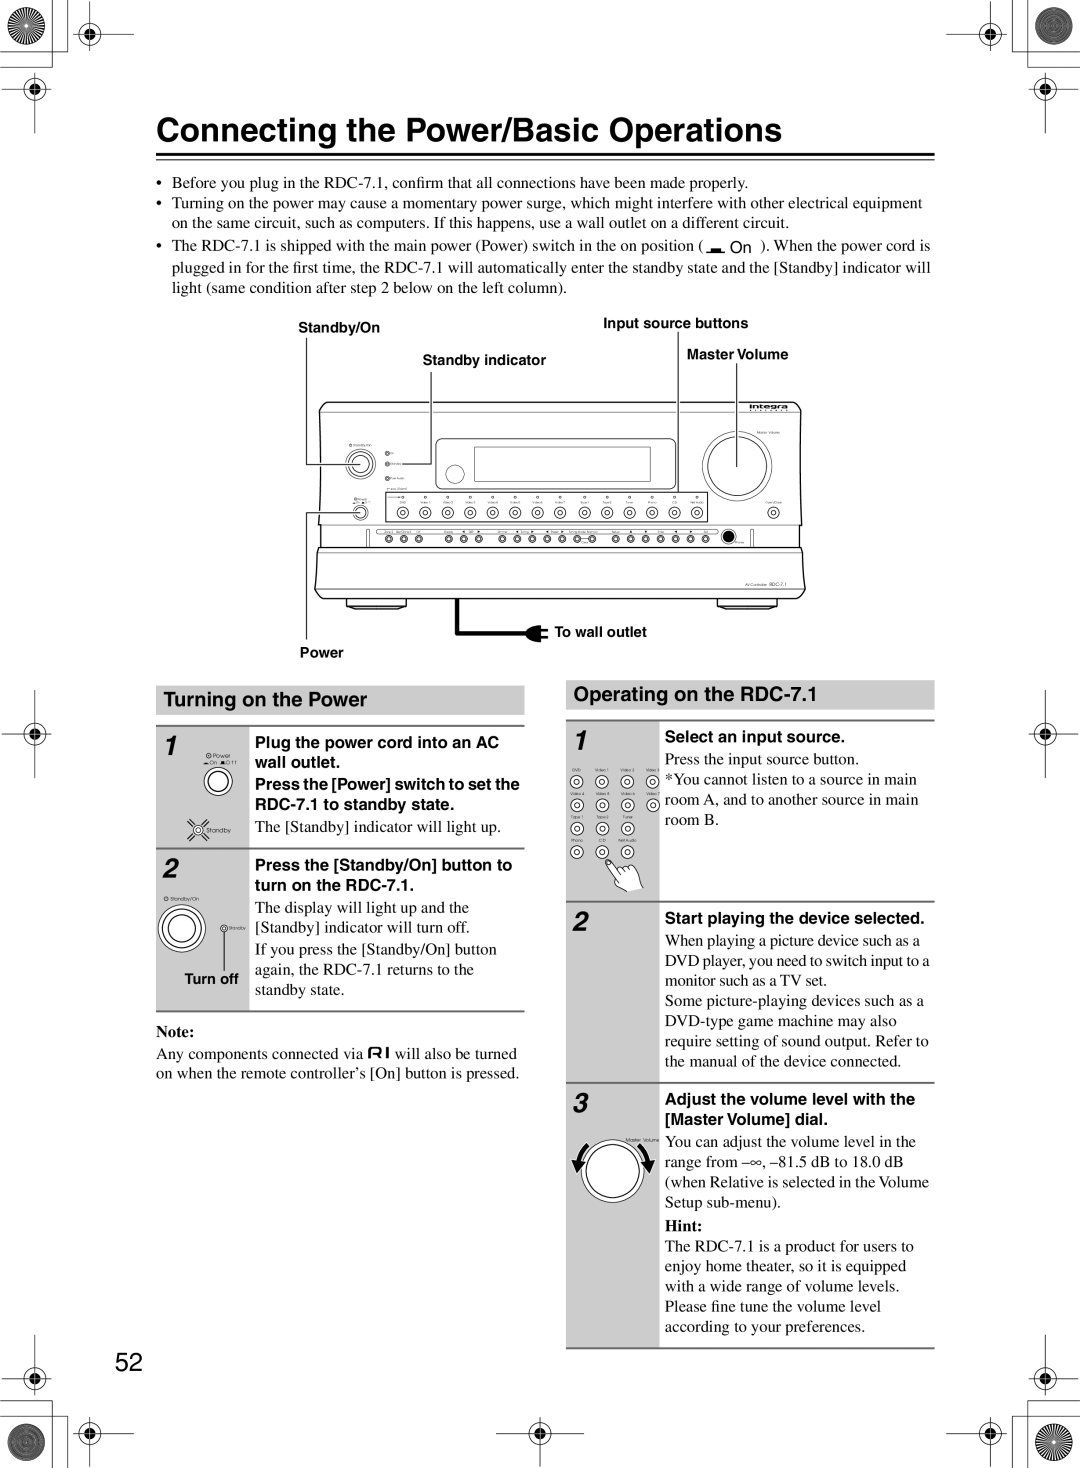 Integra instruction manual Connecting the Power/Basic Operations, Turning on the Power, Operating on the RDC-7.1, Hint 